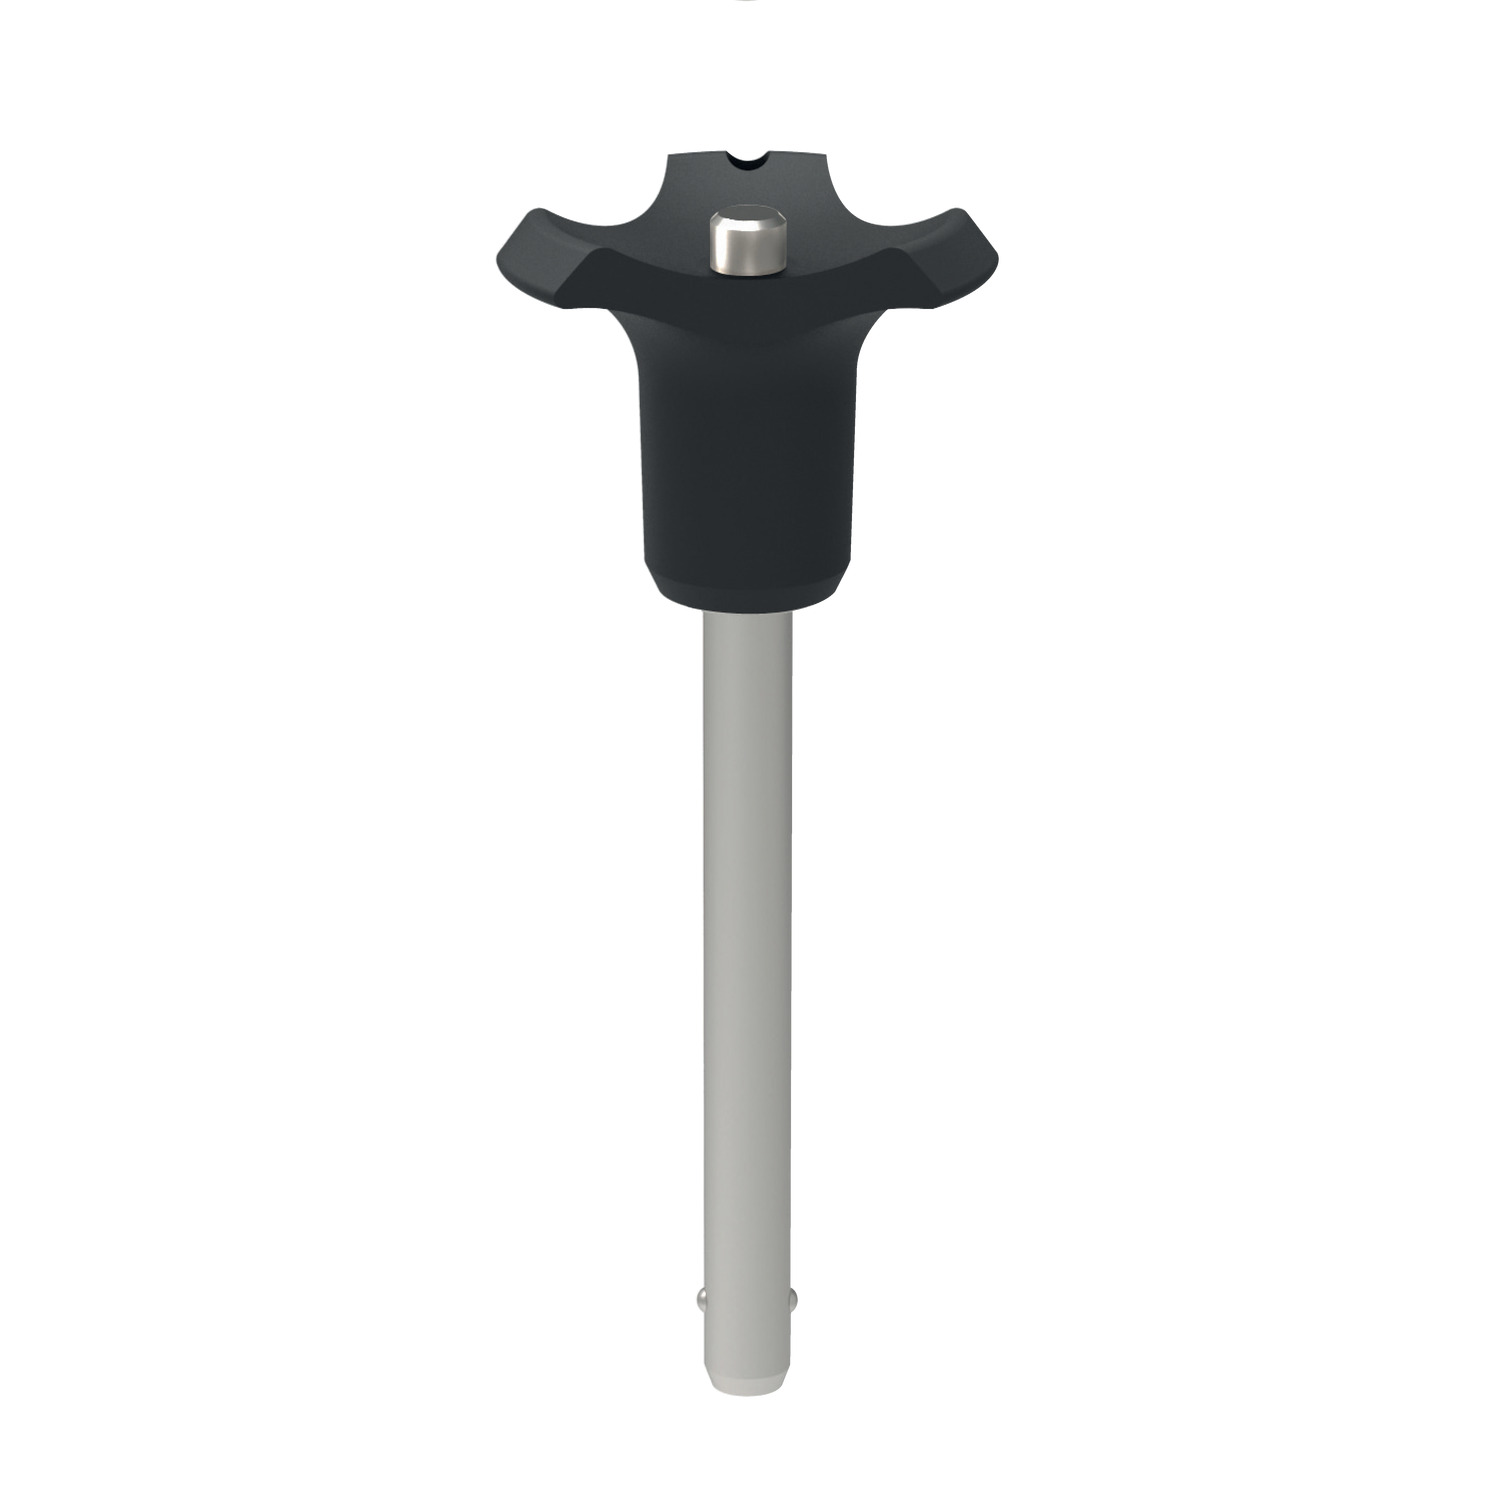 Ball Lock Pins - Single Acting - Black Plastic Handle Single Acting Plastic Handle Ball Lock Pins in four different colours (orange, blue, grey and black) to co-ordinate with your required application colour scheme. For repeated connection of parts, with high sheer forces.